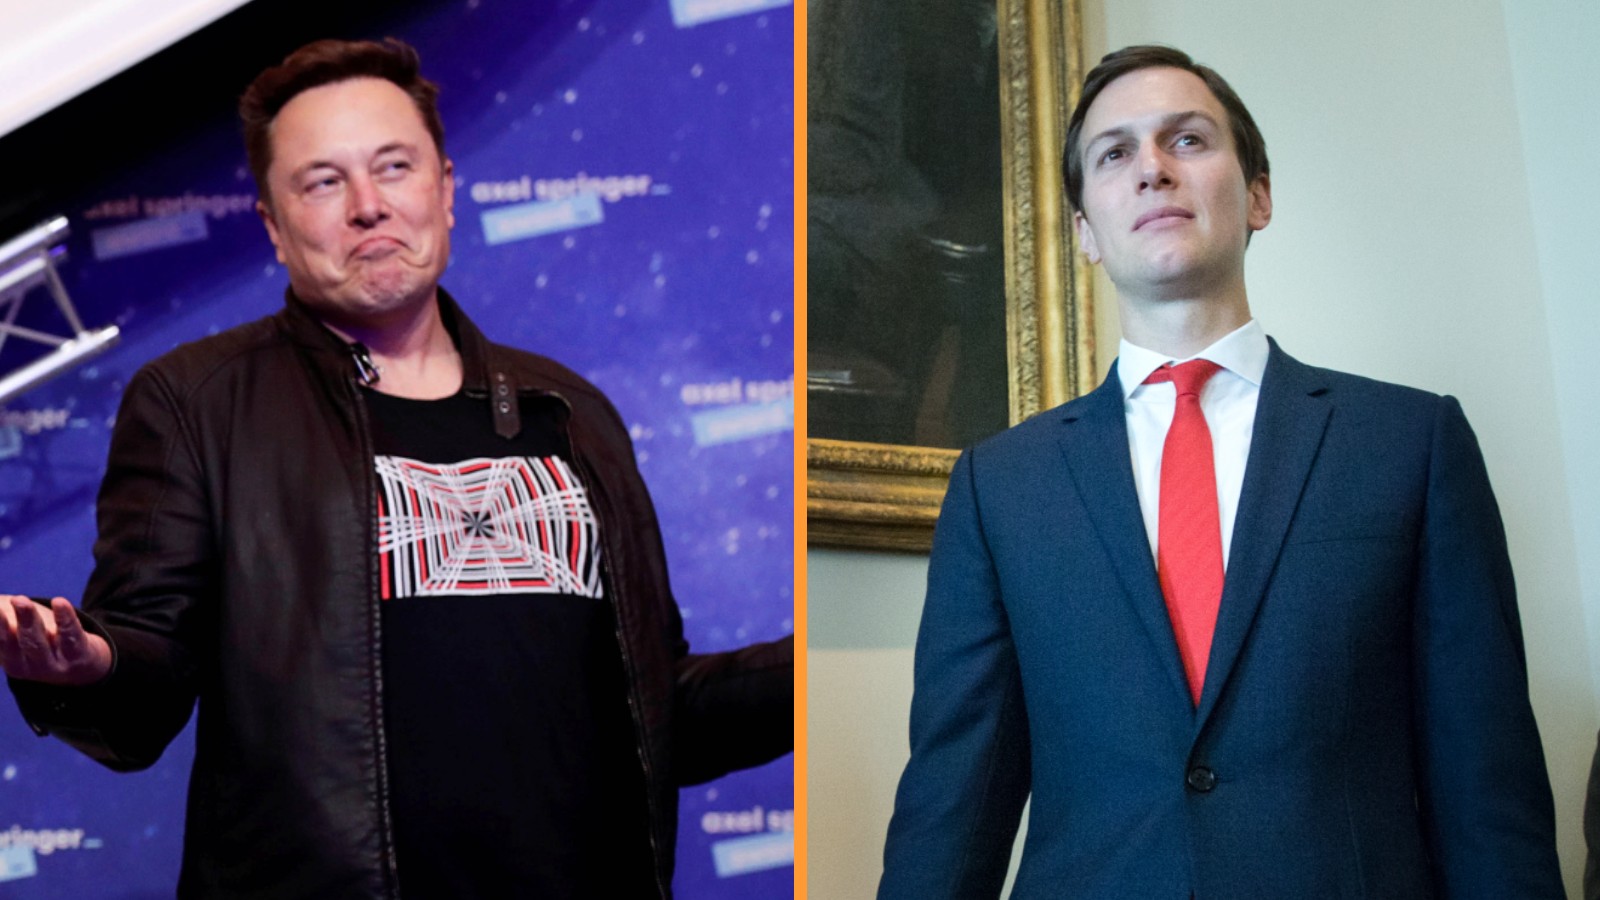 Elon Musk’s World Cup Rendezvous With Jared Kushner Triggers All Kinds of Hilariousness on Twitter